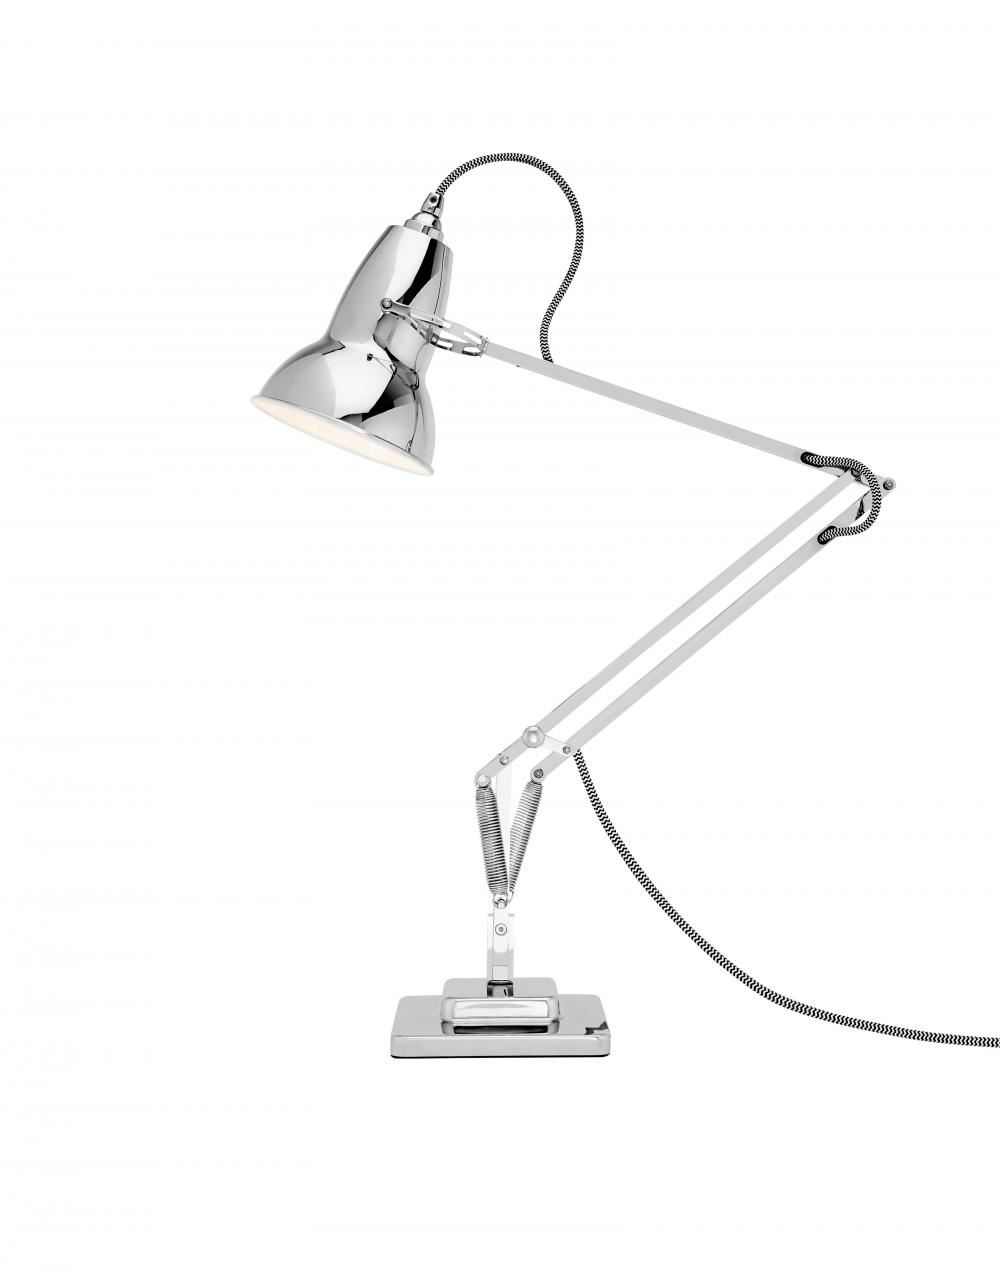 Anglepoise Original 1227 Desk Lamp Bright Chrome Weighted Base